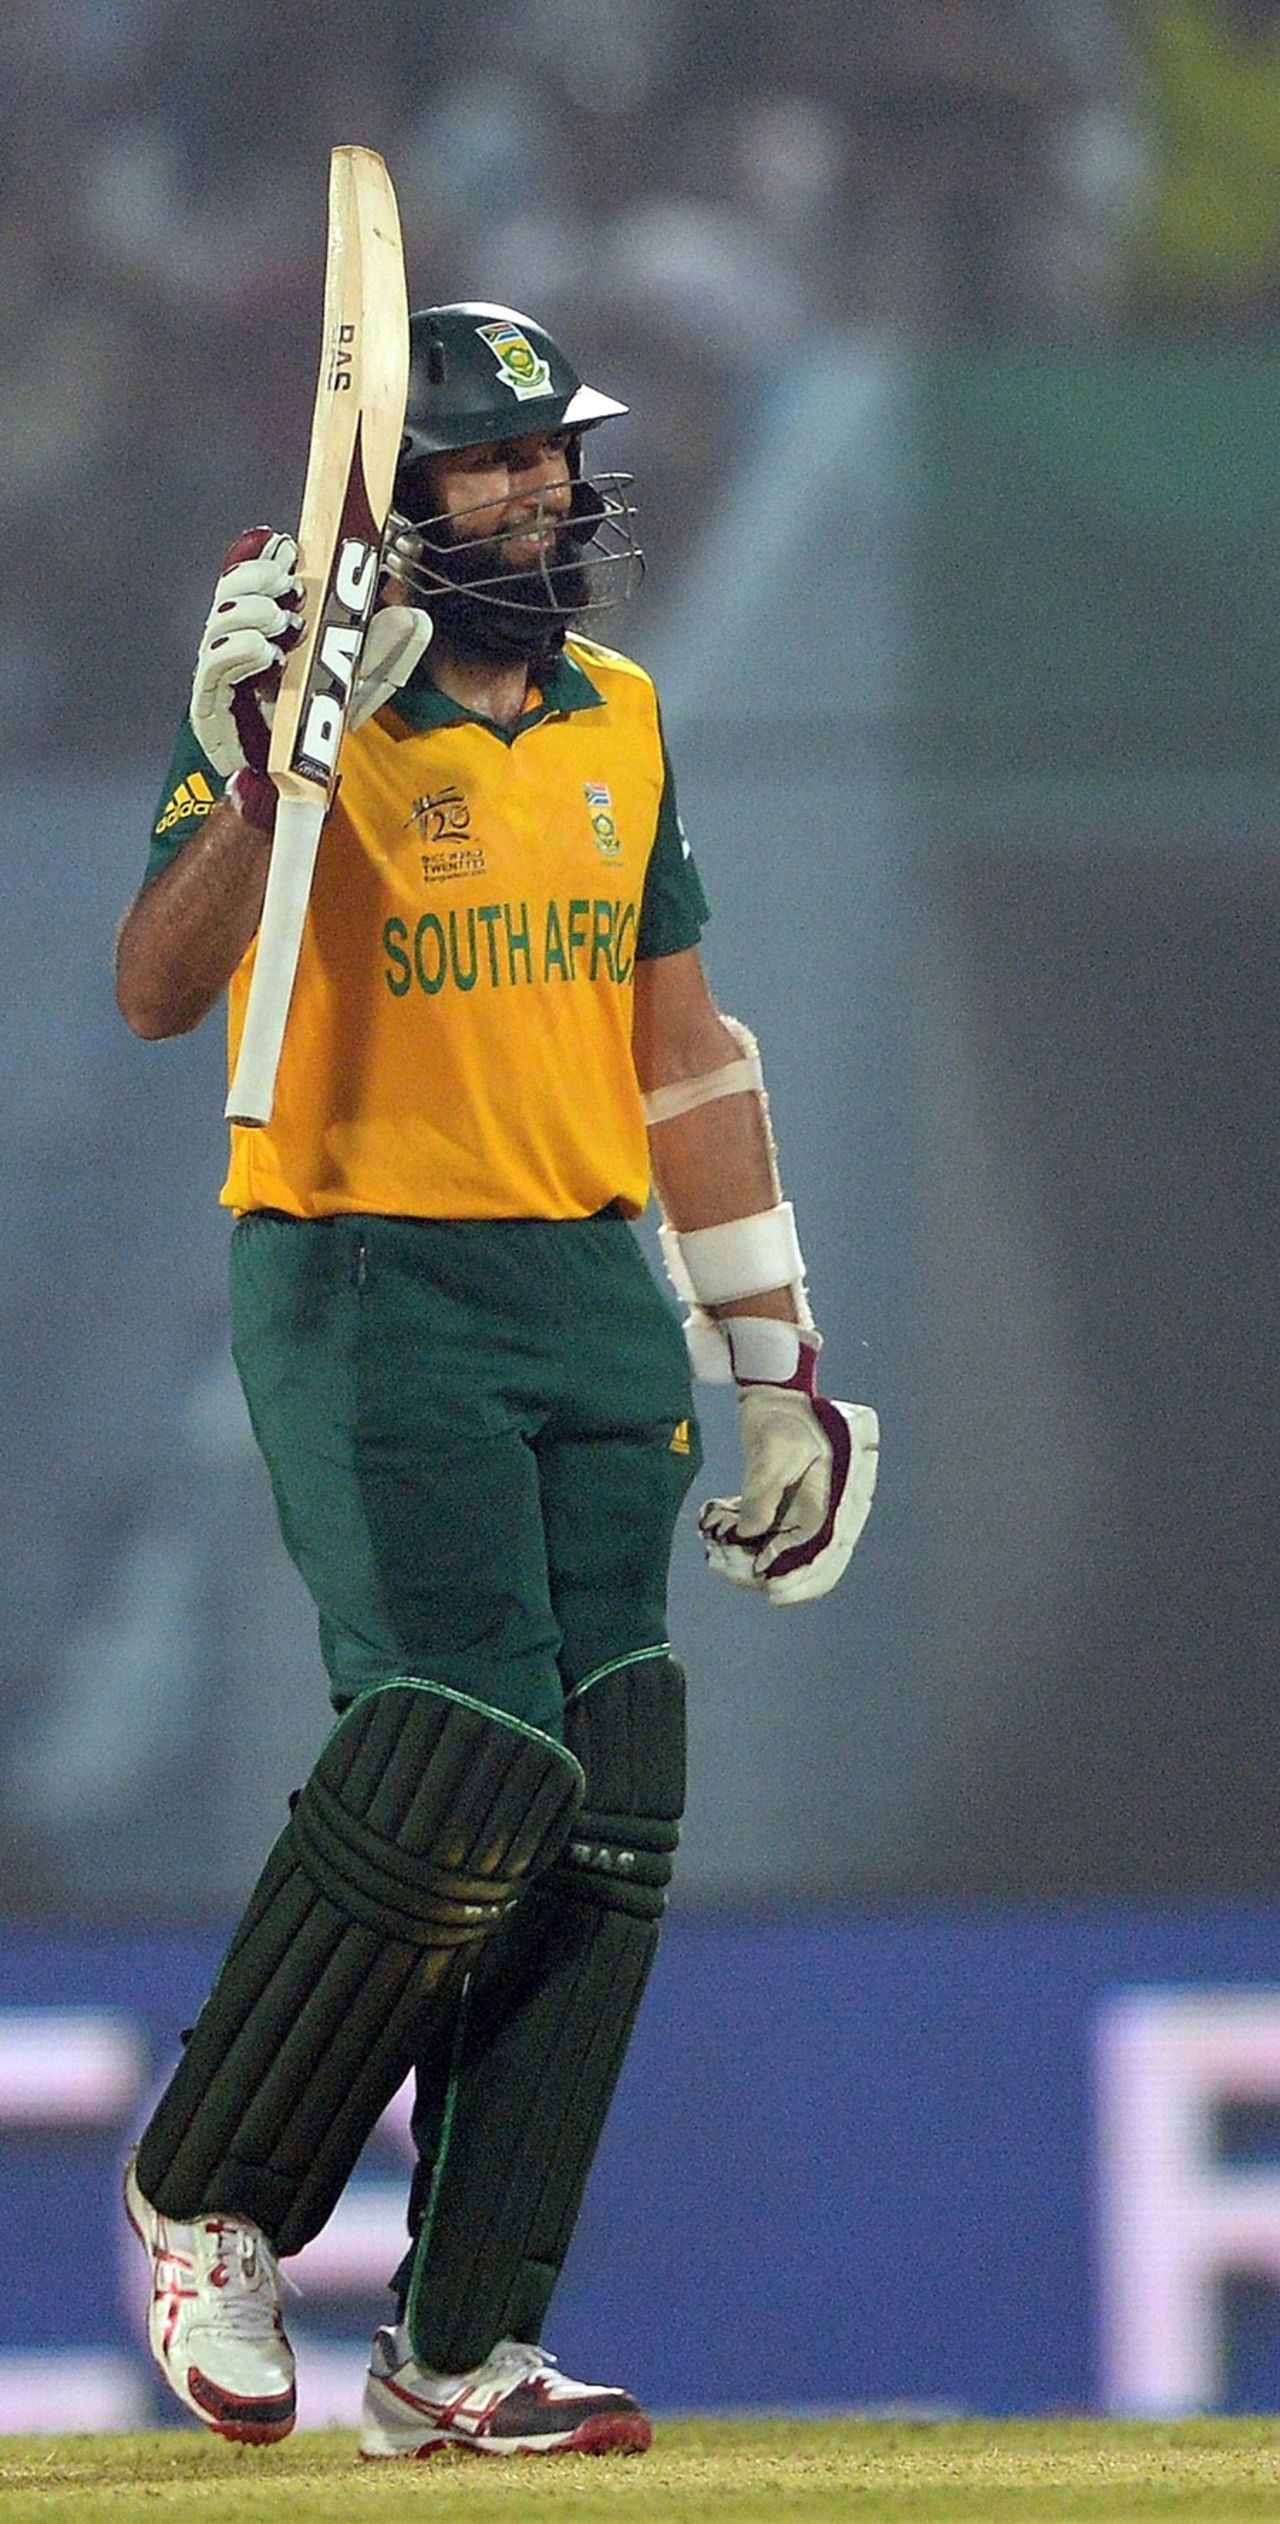 Hashim Amla raises his bat after scoring his maiden T20 fifty, England v South Africa, World Twenty20 2014, Group 1, Chittagong, March 29, 2014